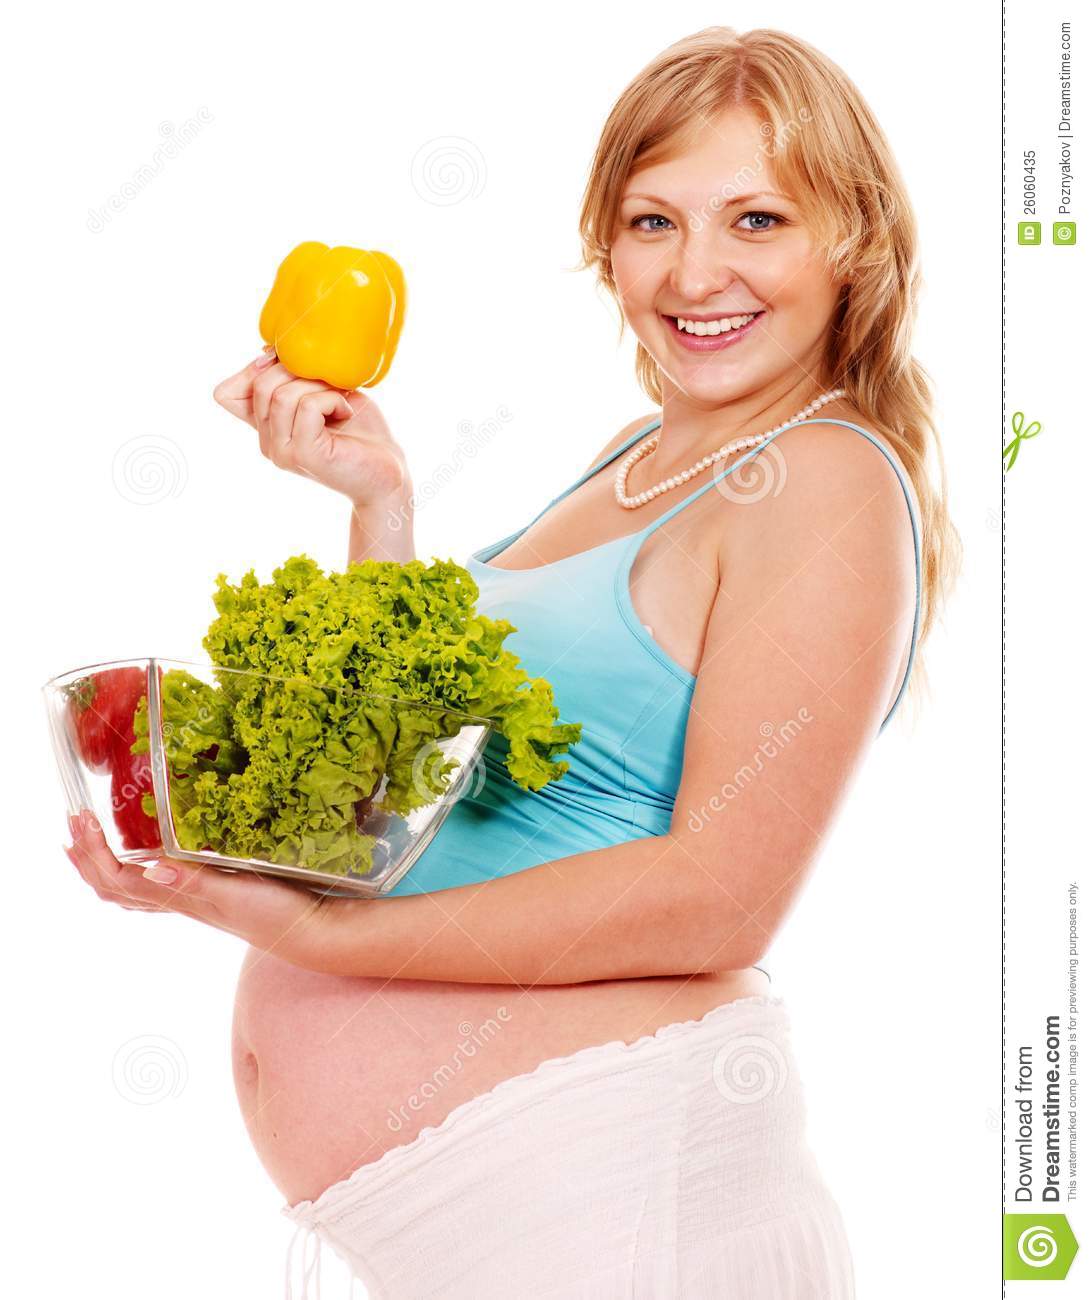 Pregnant Woman Eating Vegetable  Royalty Free Stock Photo   Image